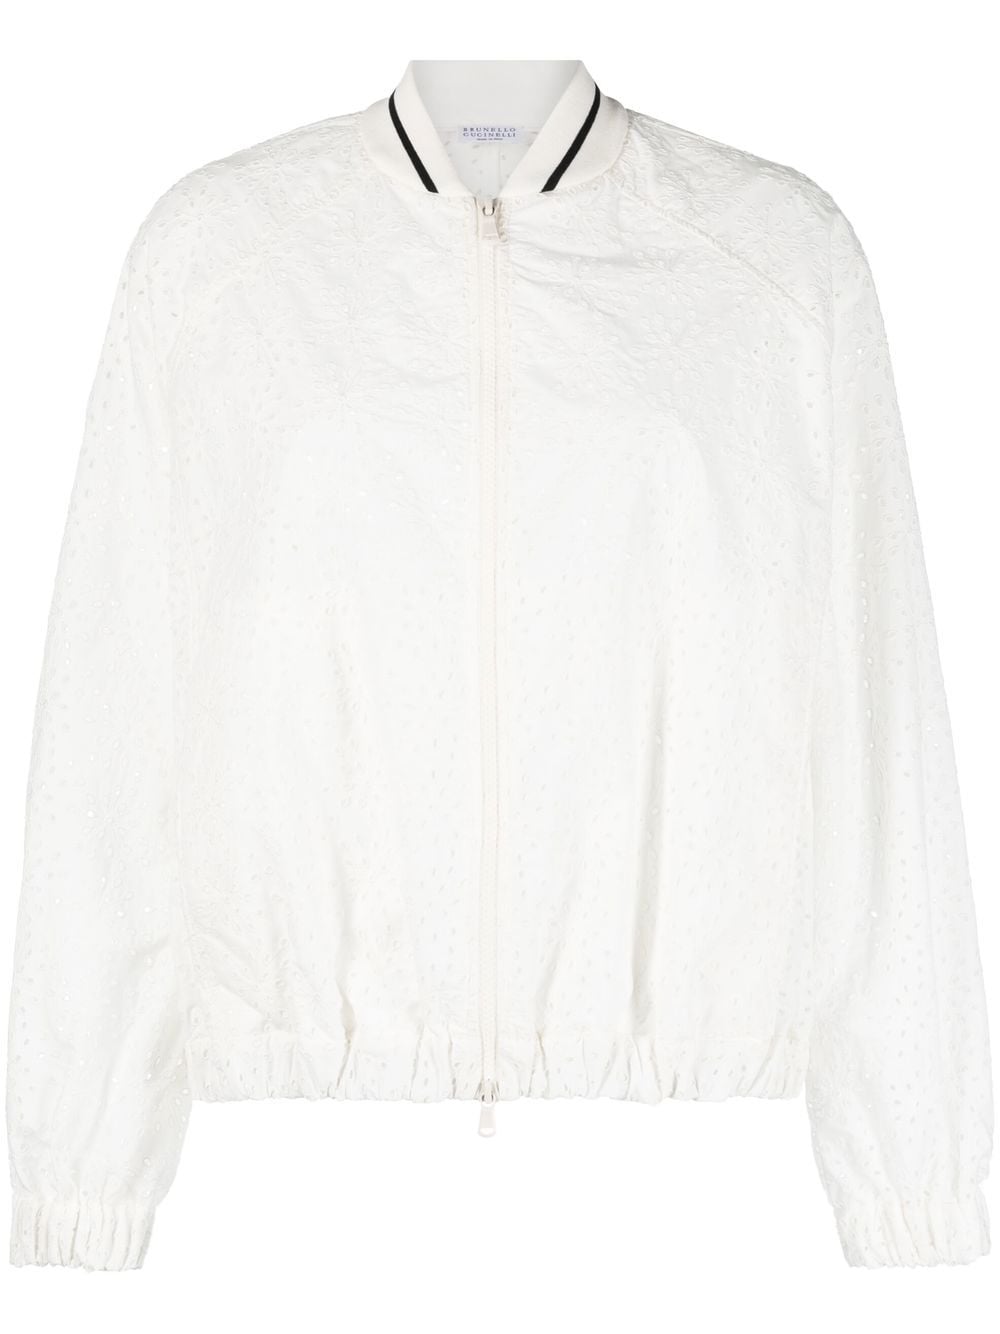 Image 1 of Brunello Cucinelli broderie anglaise bomber jacket